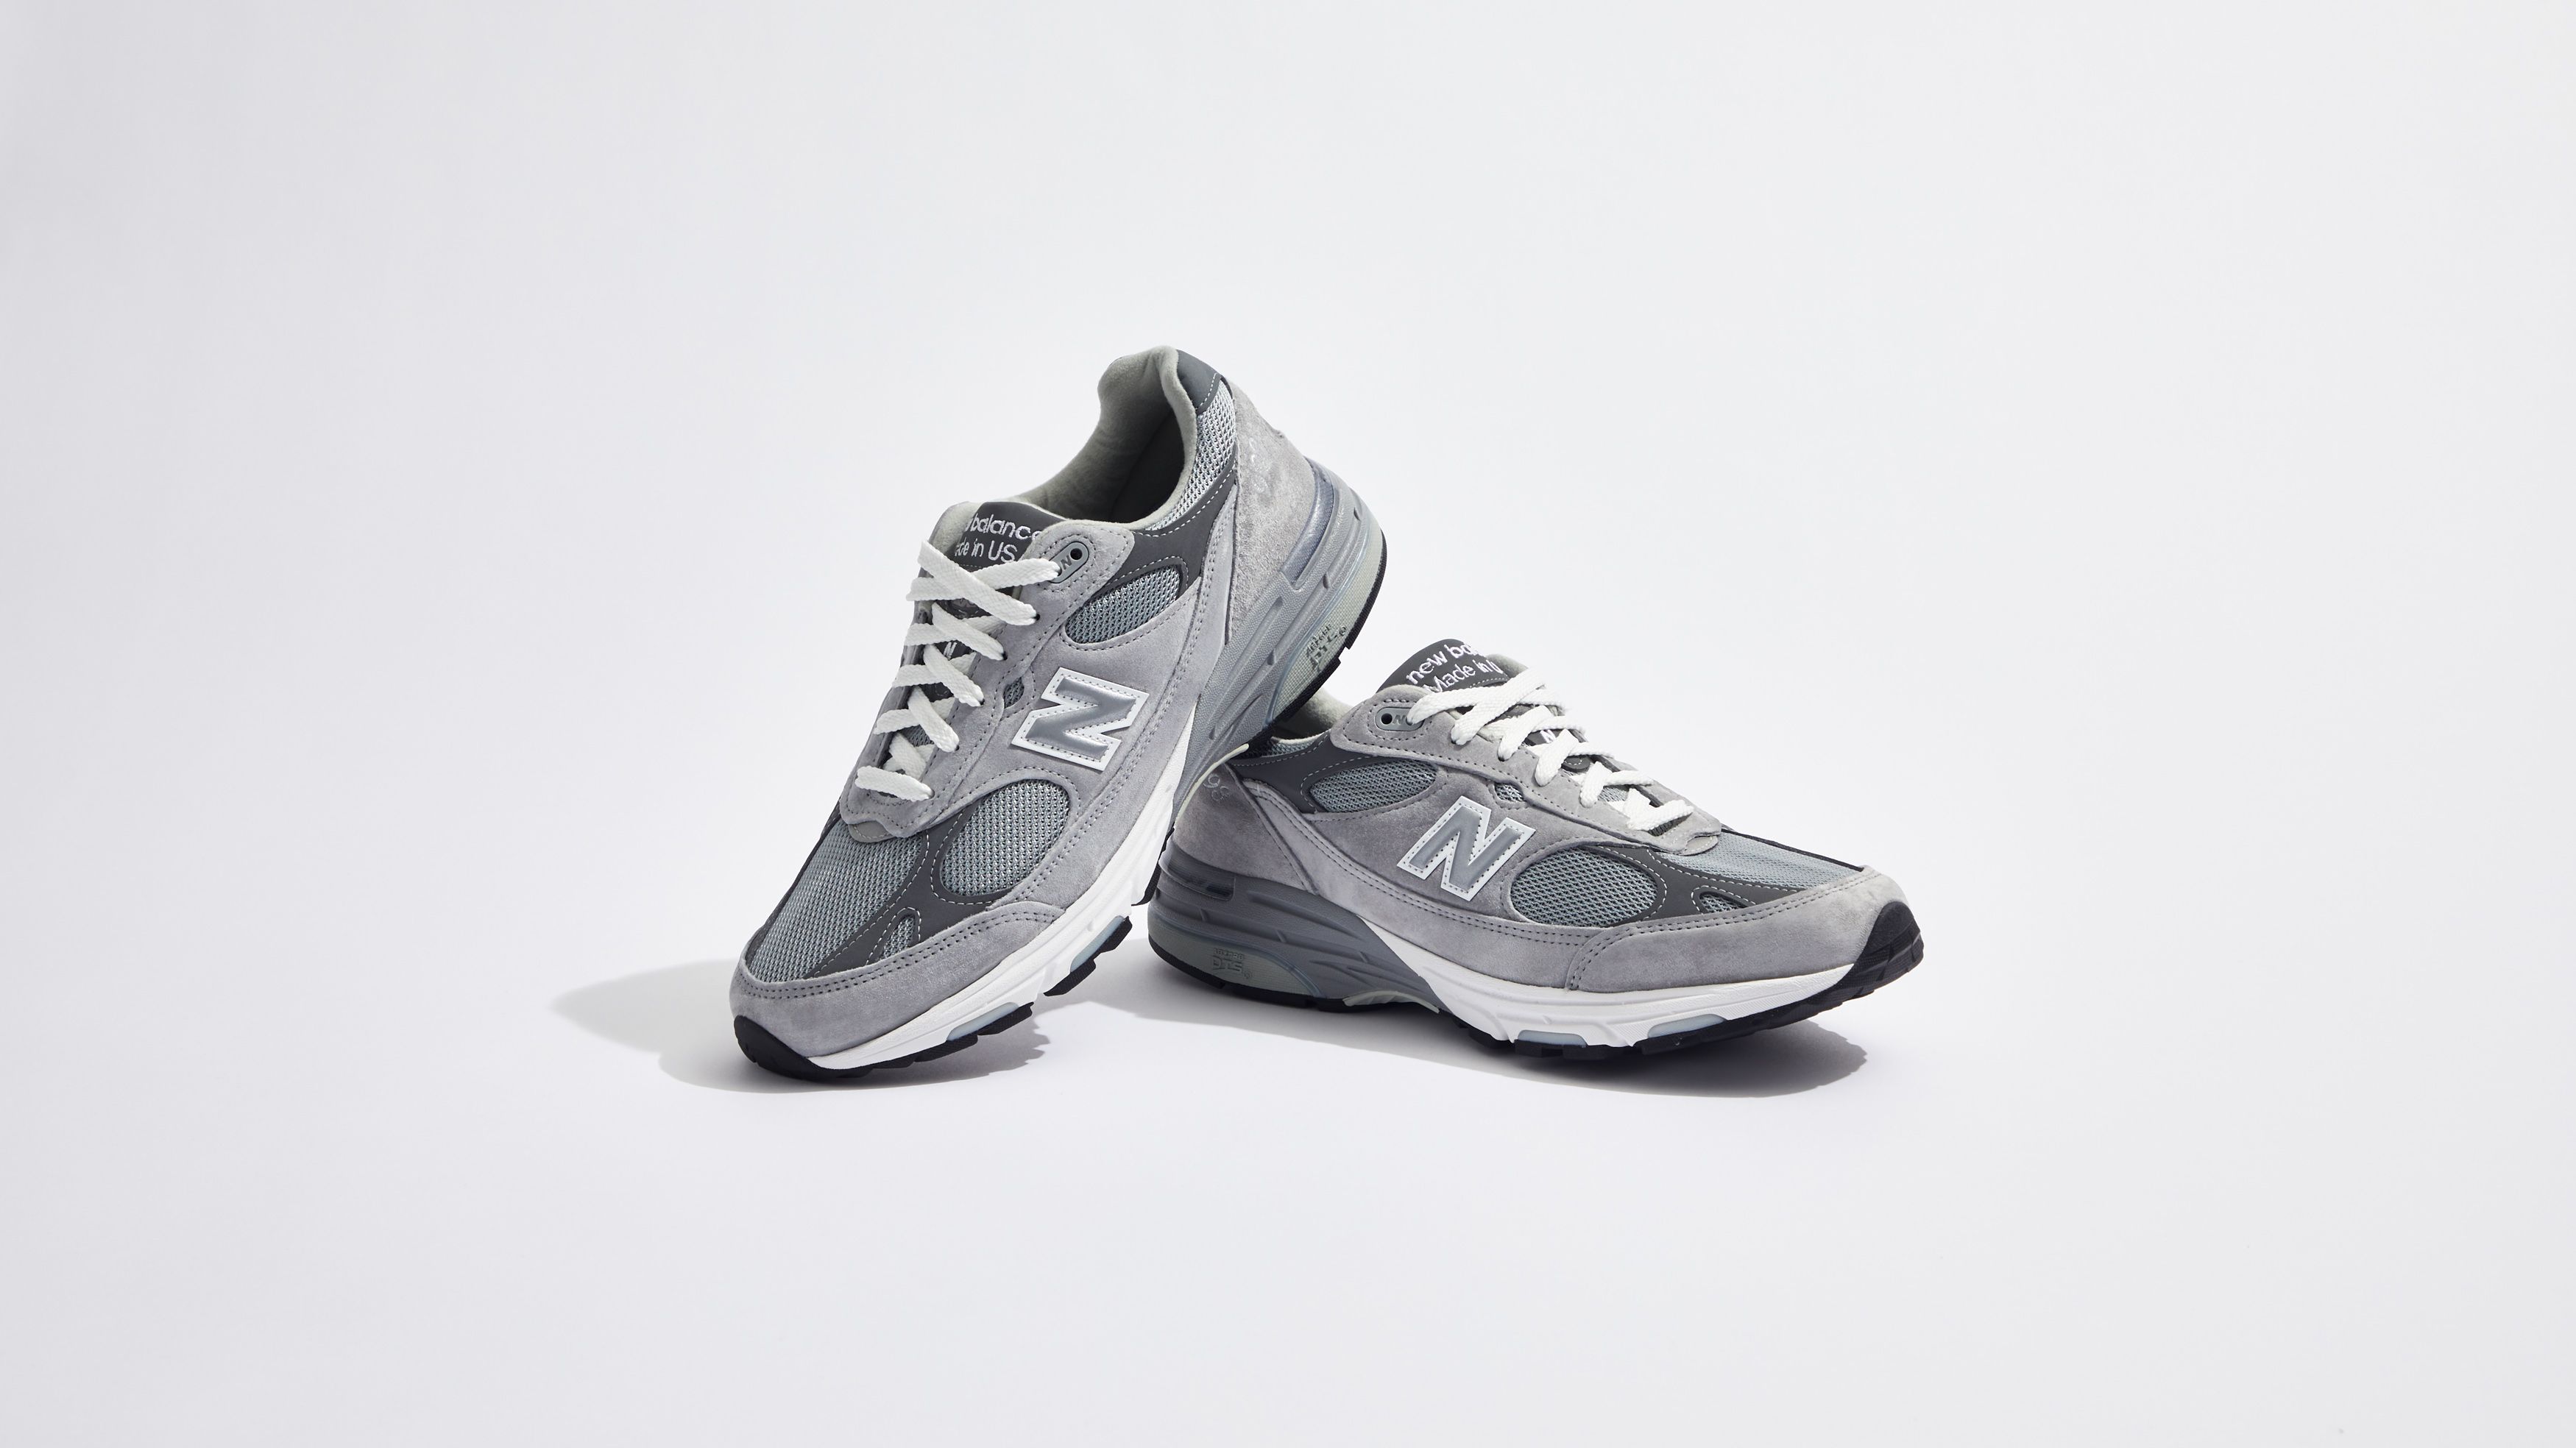 New Balance Shoes & Accessories   Shoe Carnival